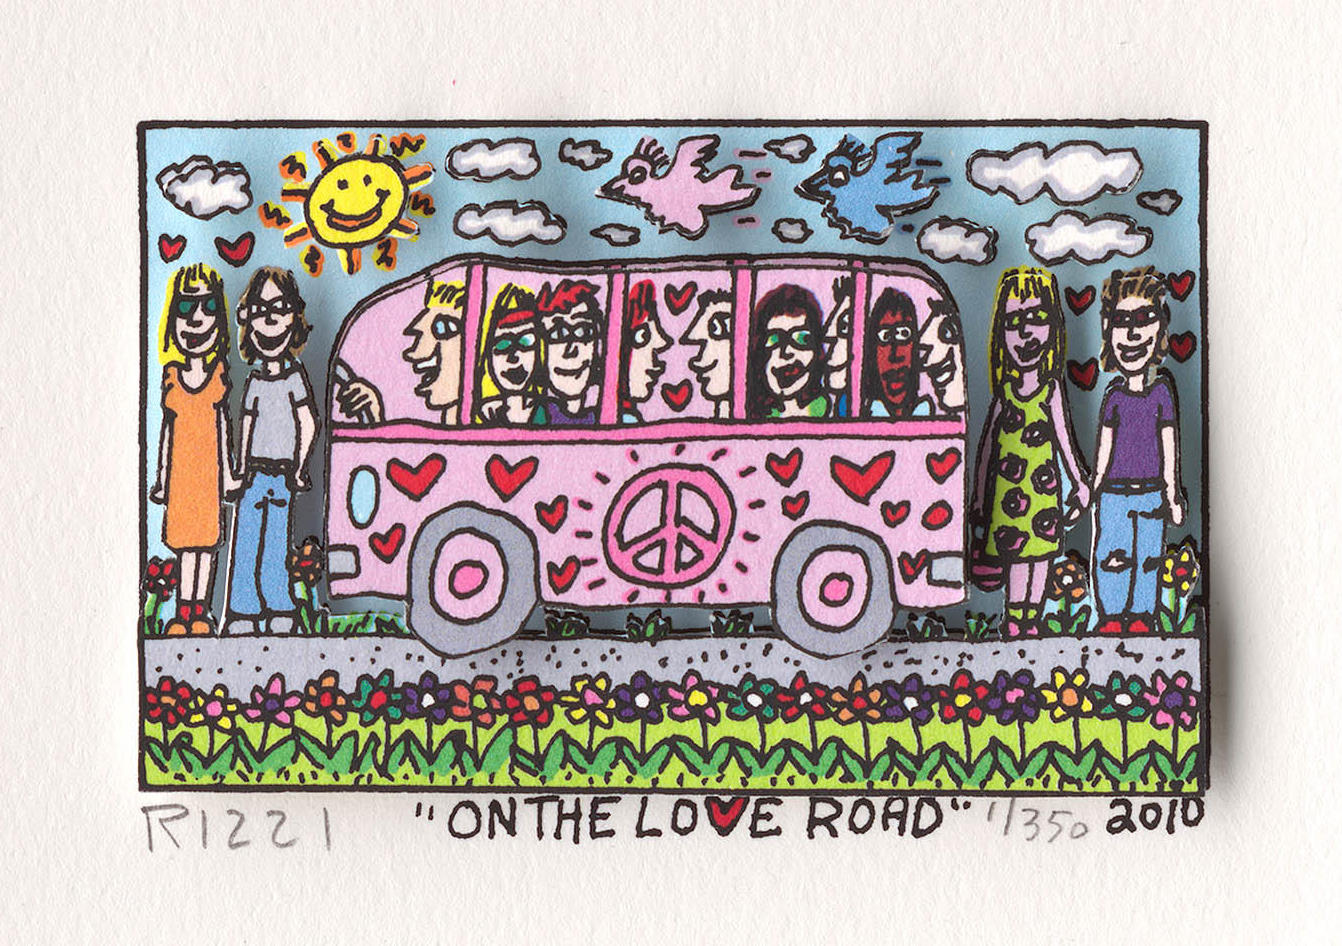 On the Love Road